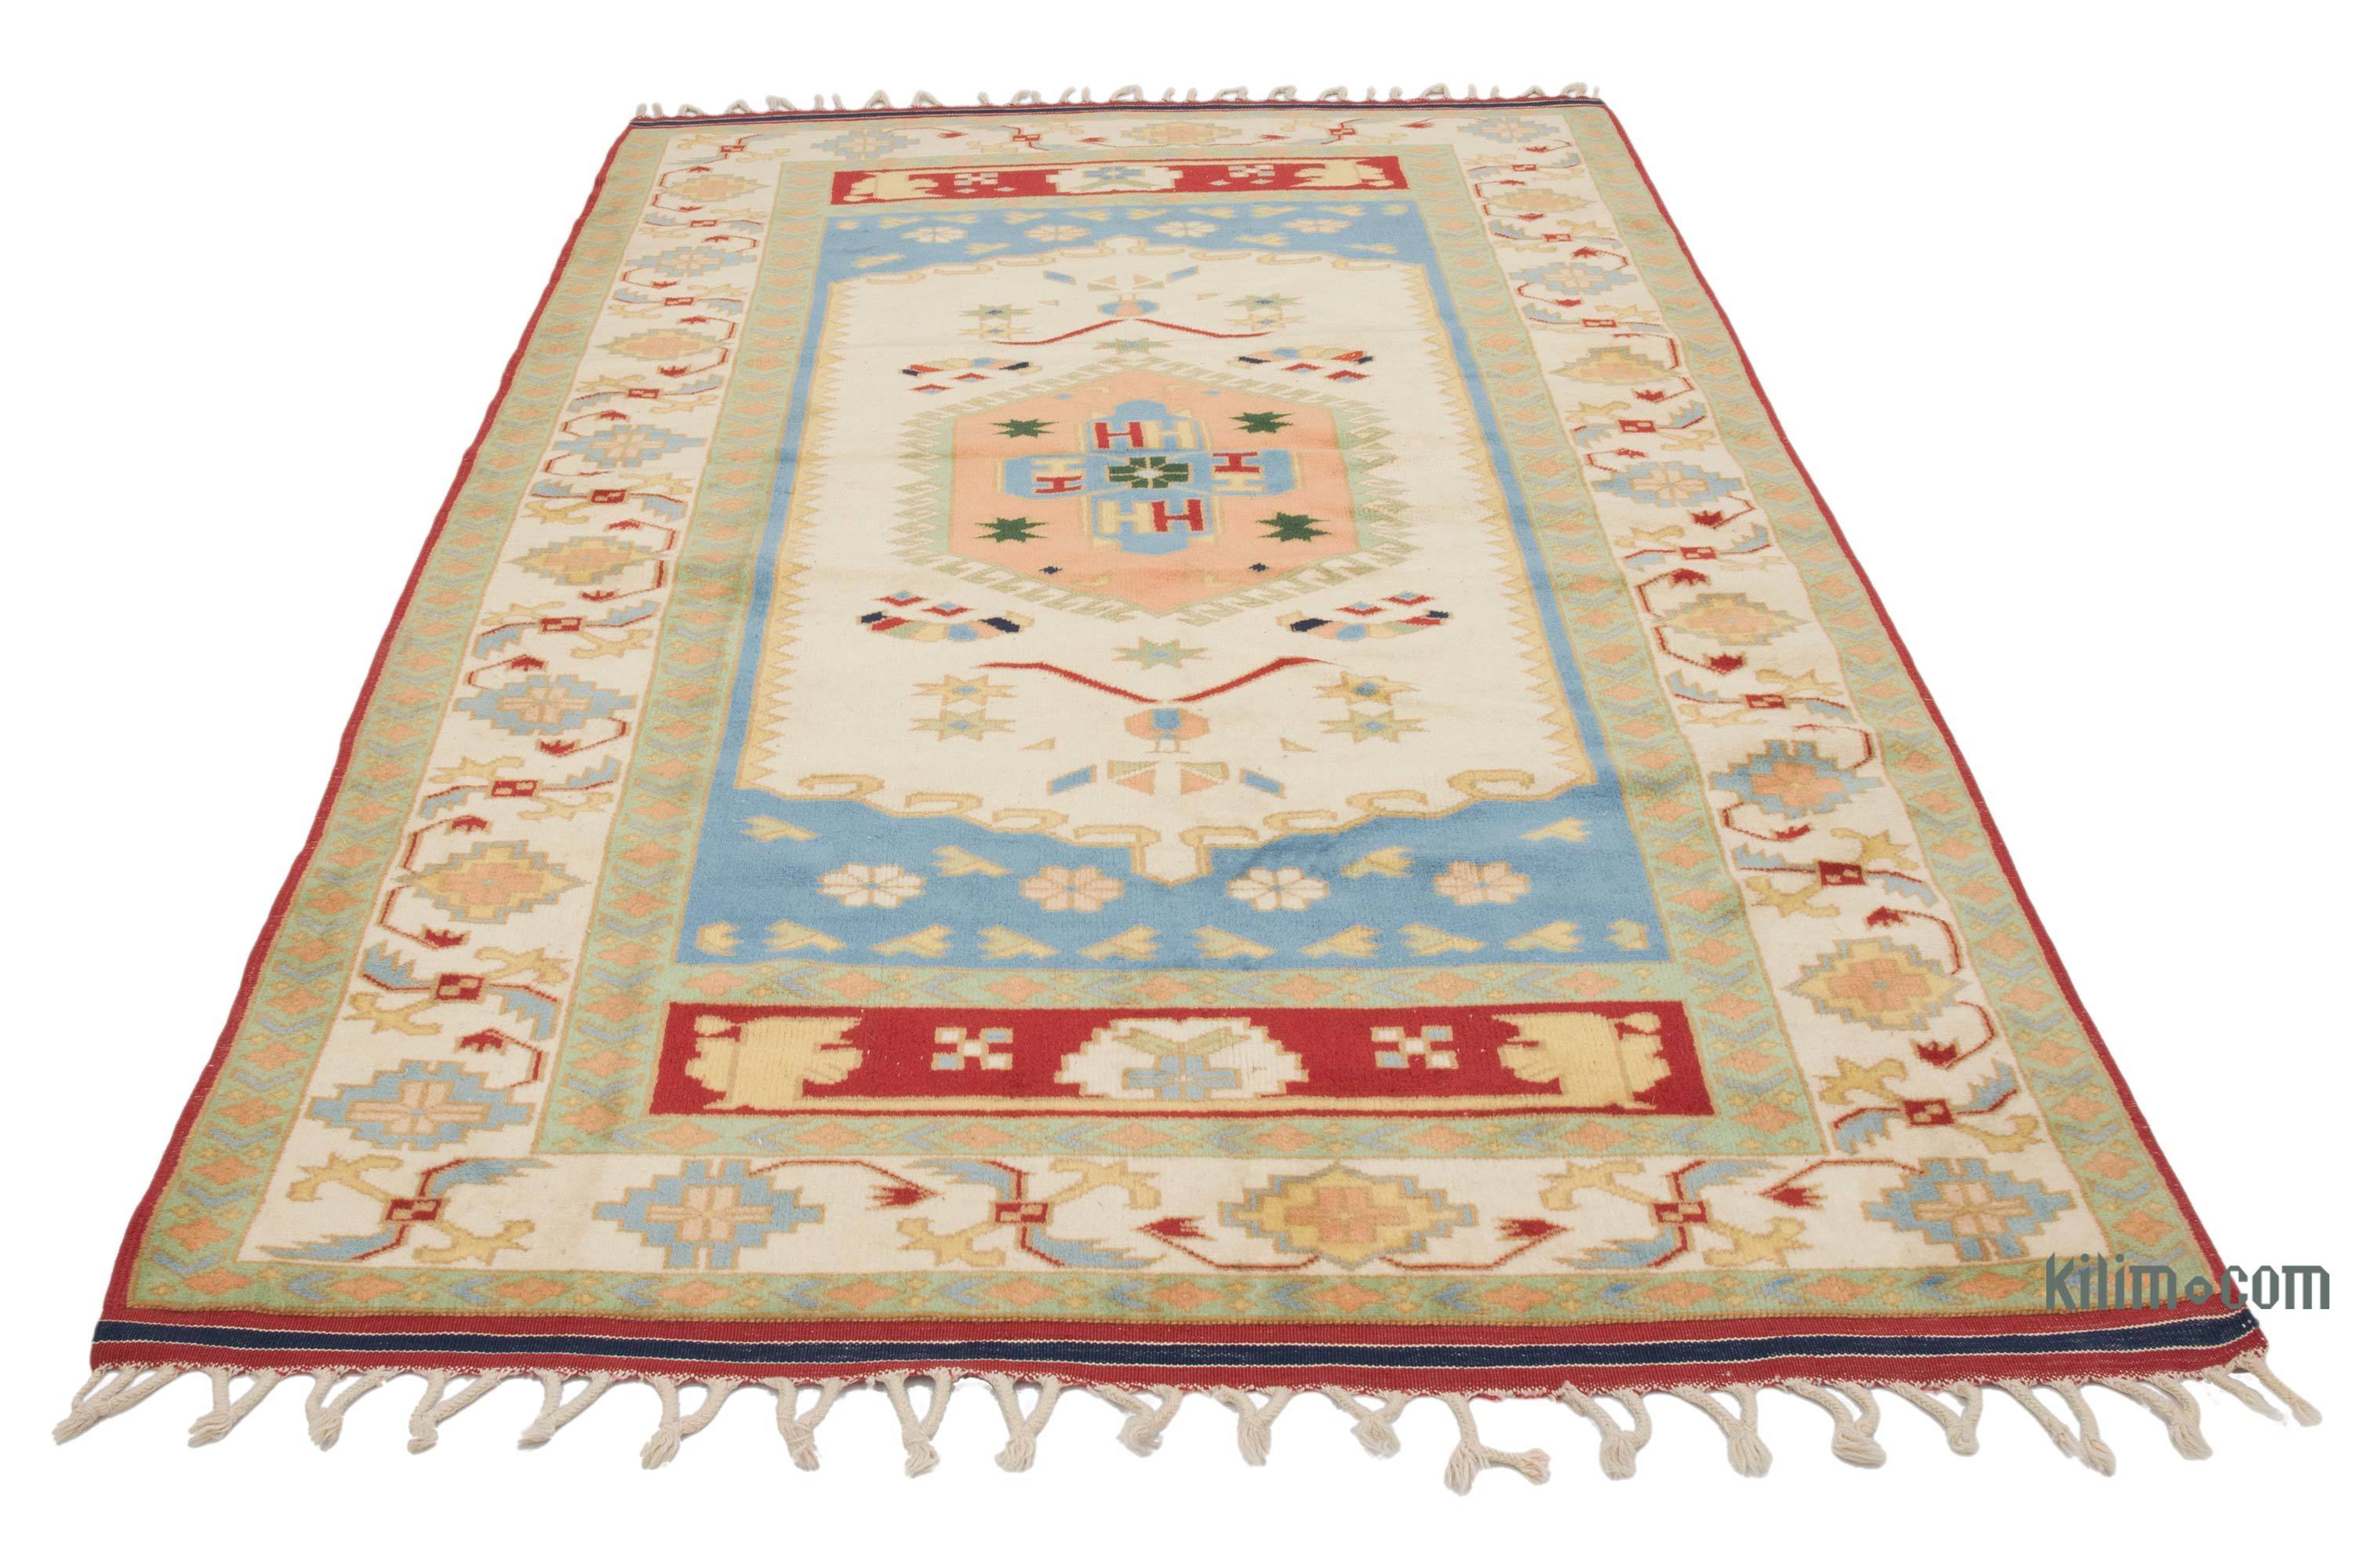 Vintage Turkish Hand-Knotted Rug - 4' 2 x 7' 3 (50 x 87)